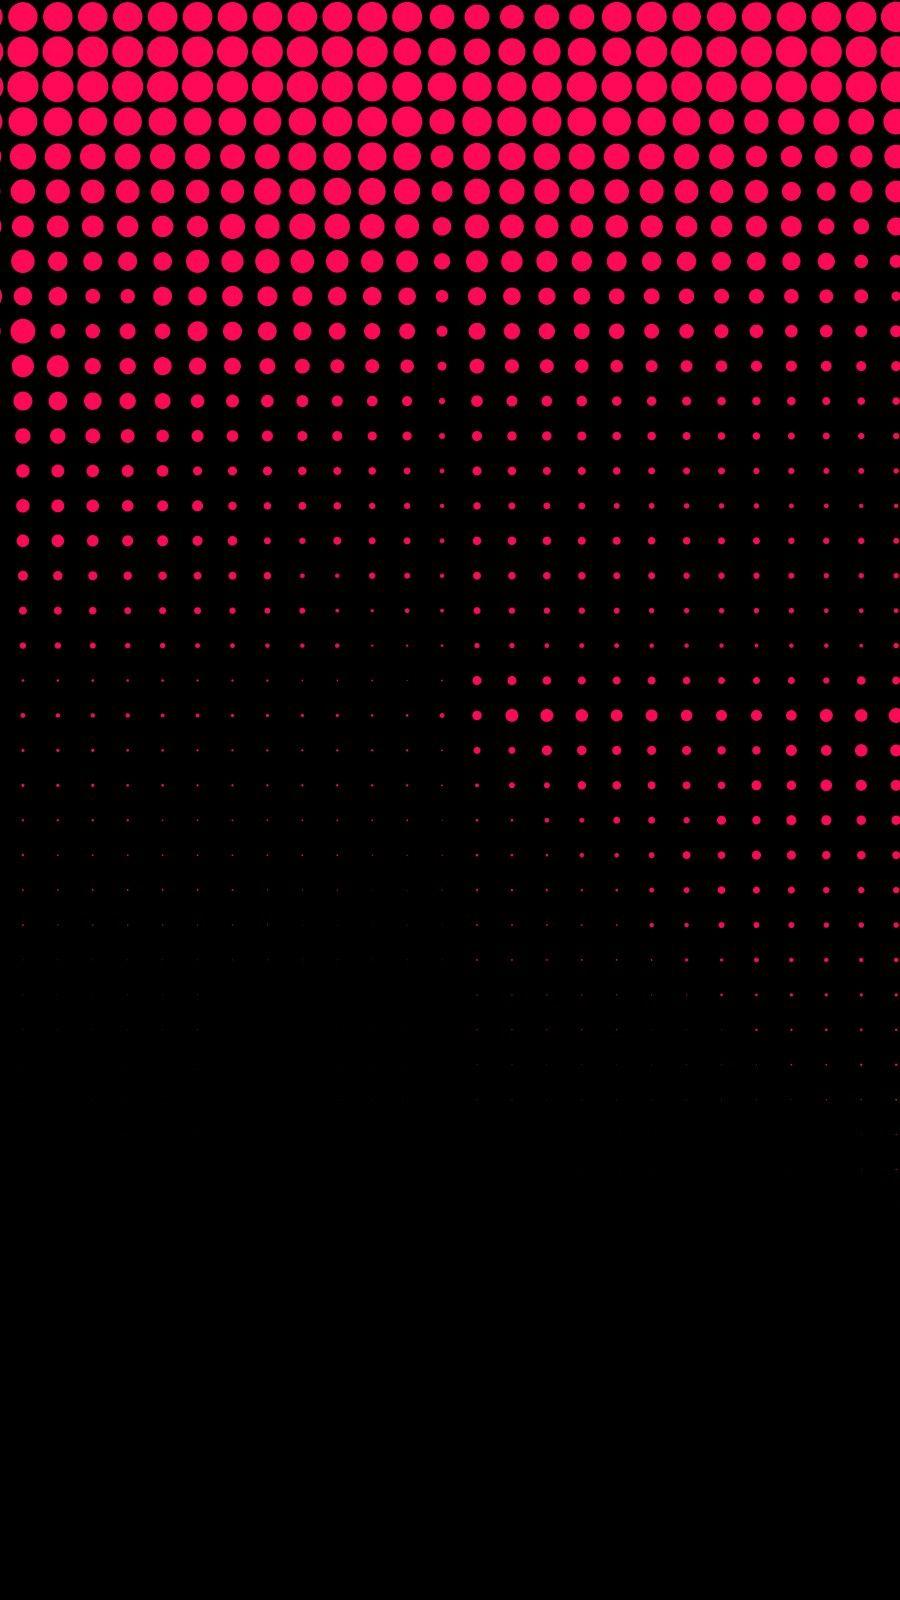 Black AMOLED Red Lines Abstract Wallpaper for Phone